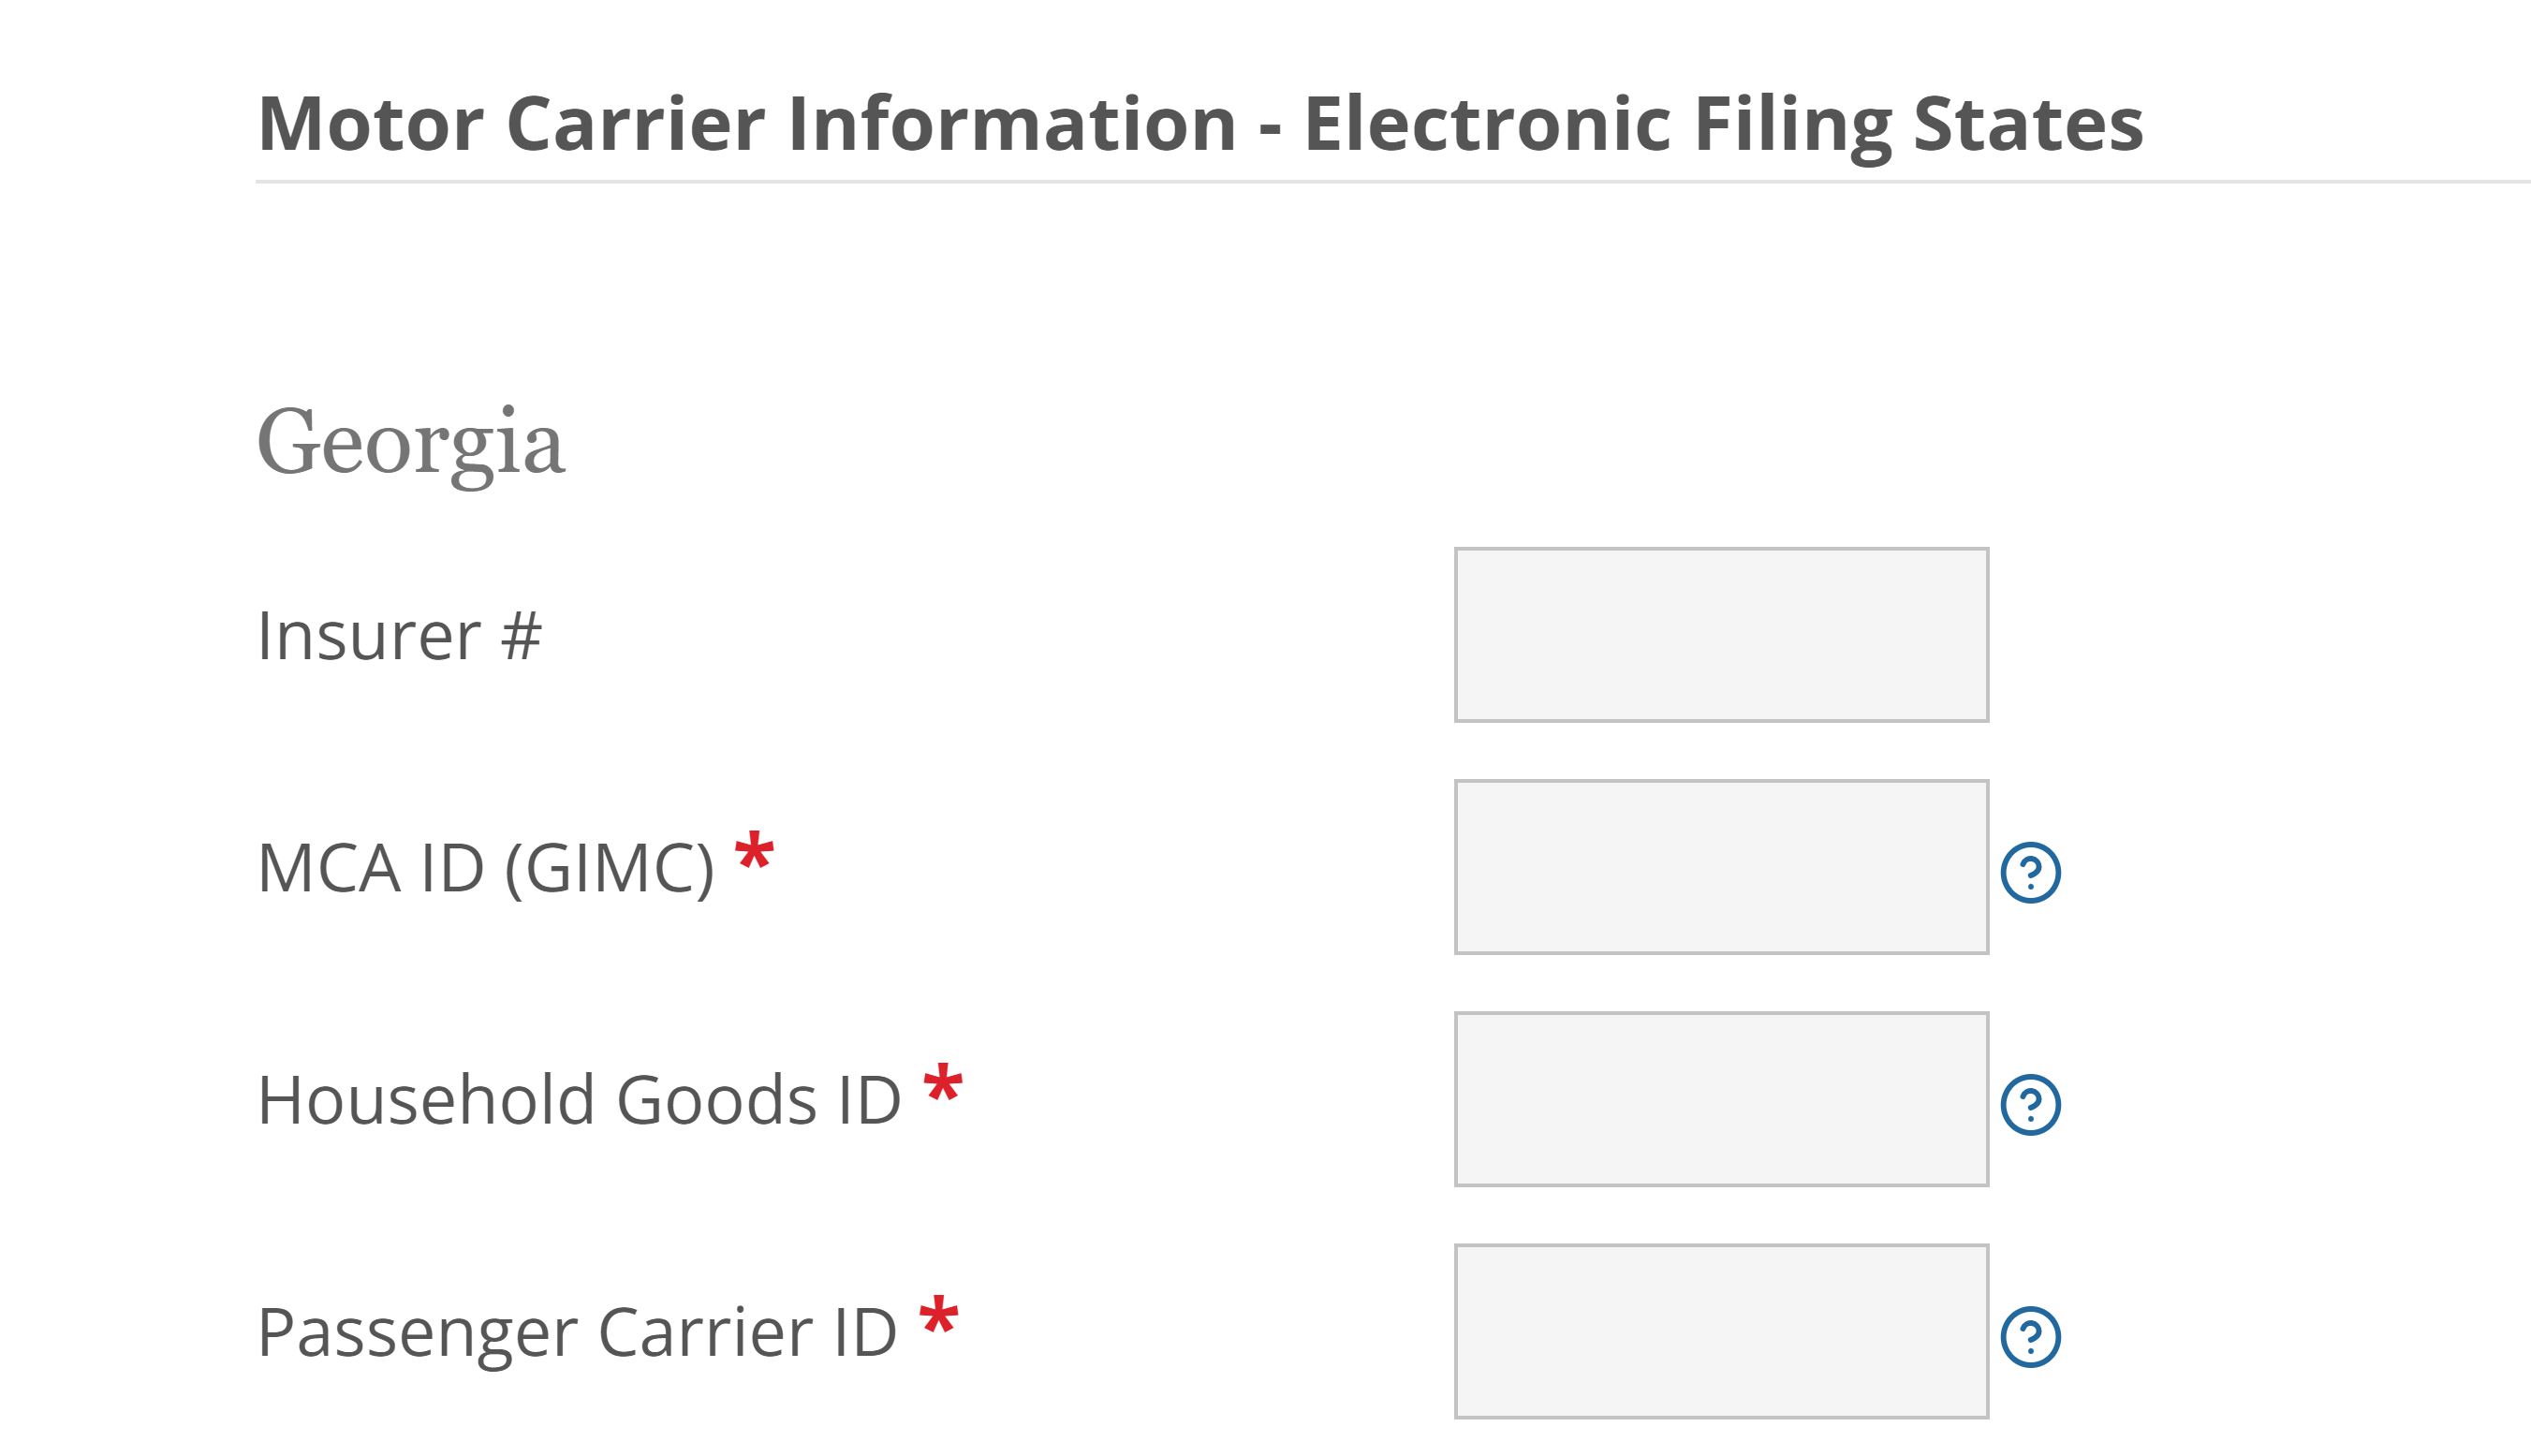 Screen shot of GA Form E filing form with Georgia motor carrier ID number fields.